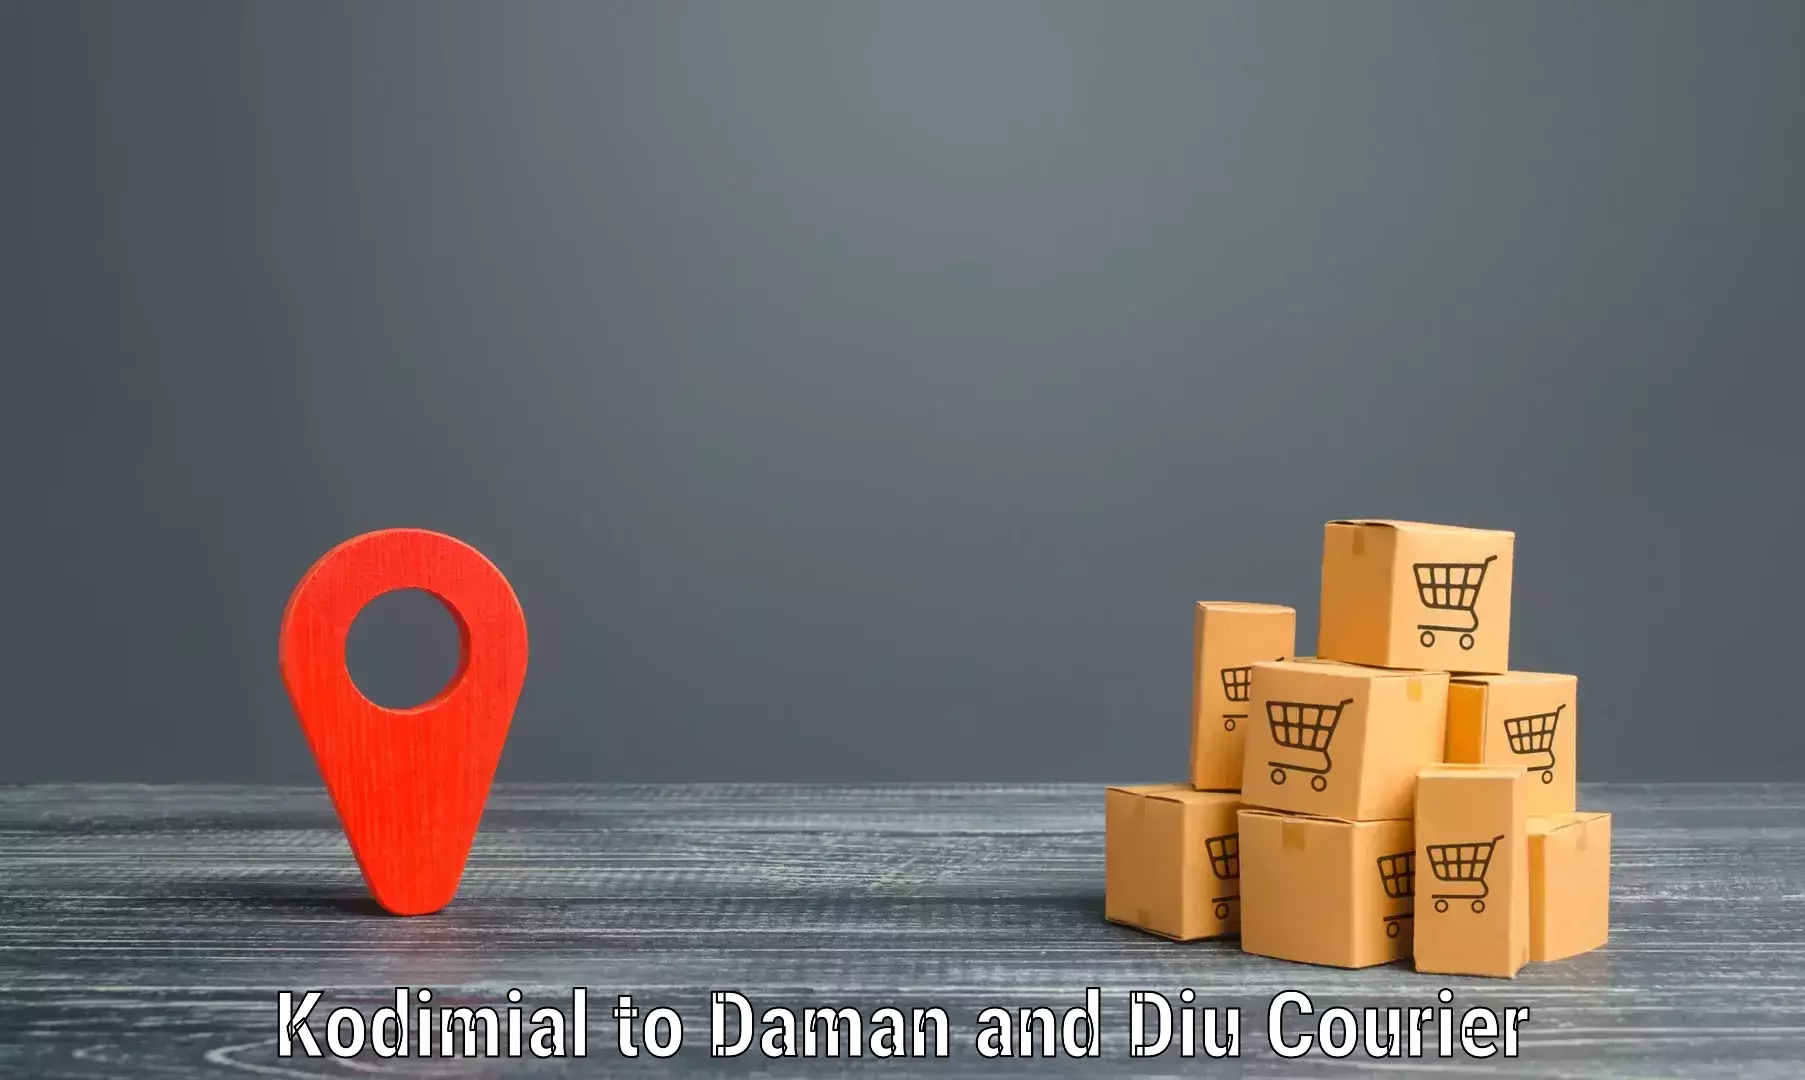 Specialized shipment handling Kodimial to Daman and Diu